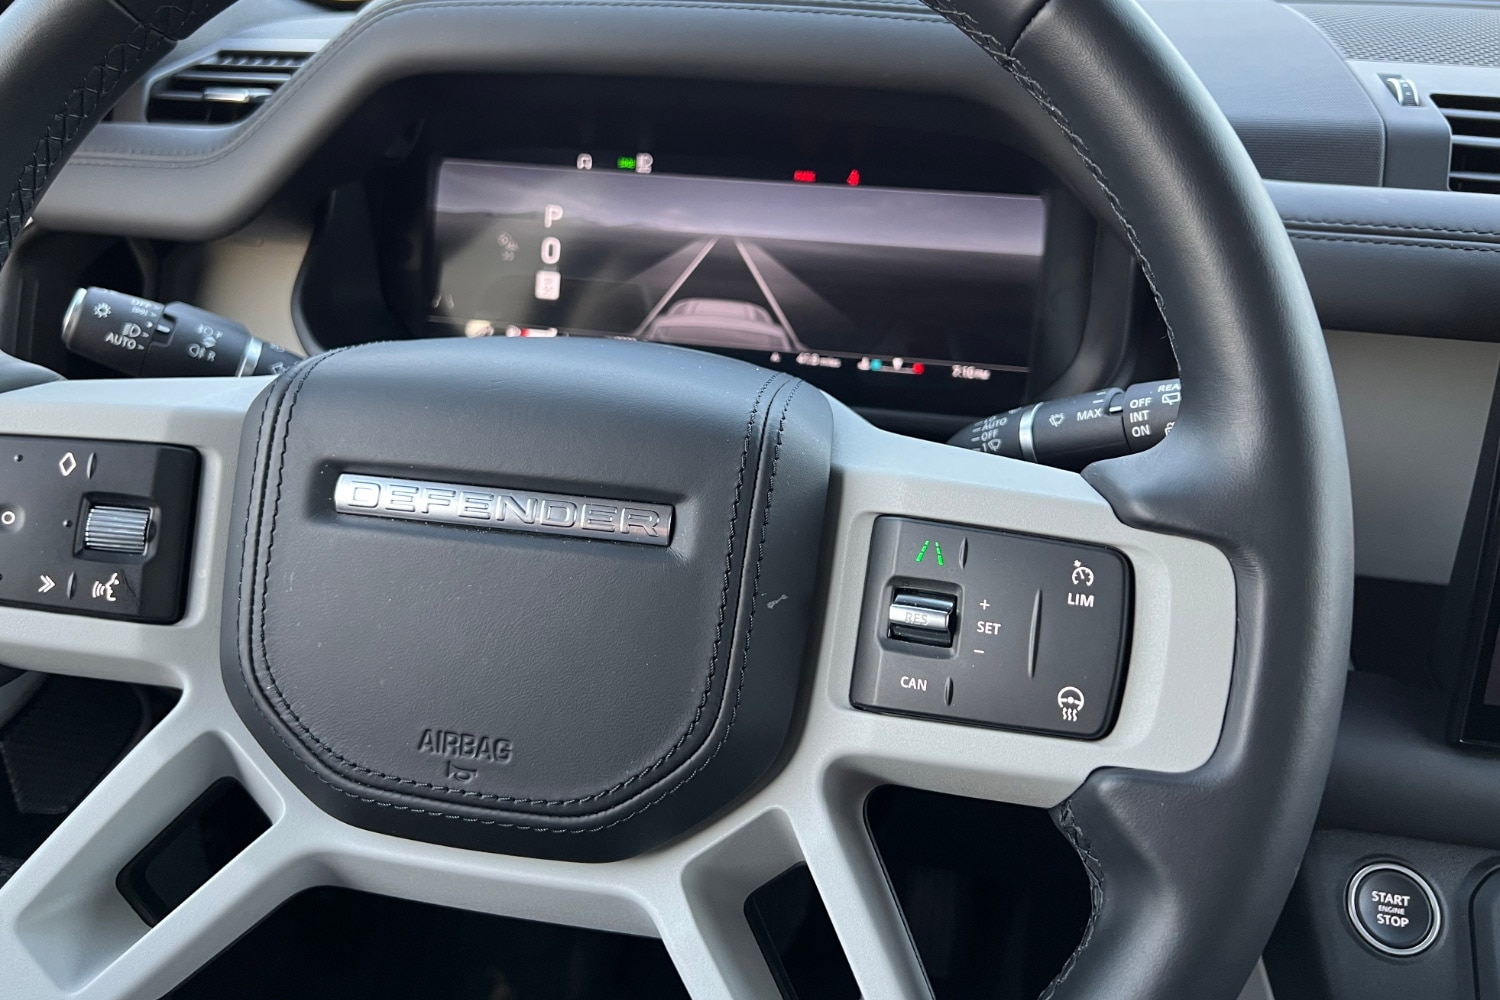 The steering wheel controls and driver's digital control screen